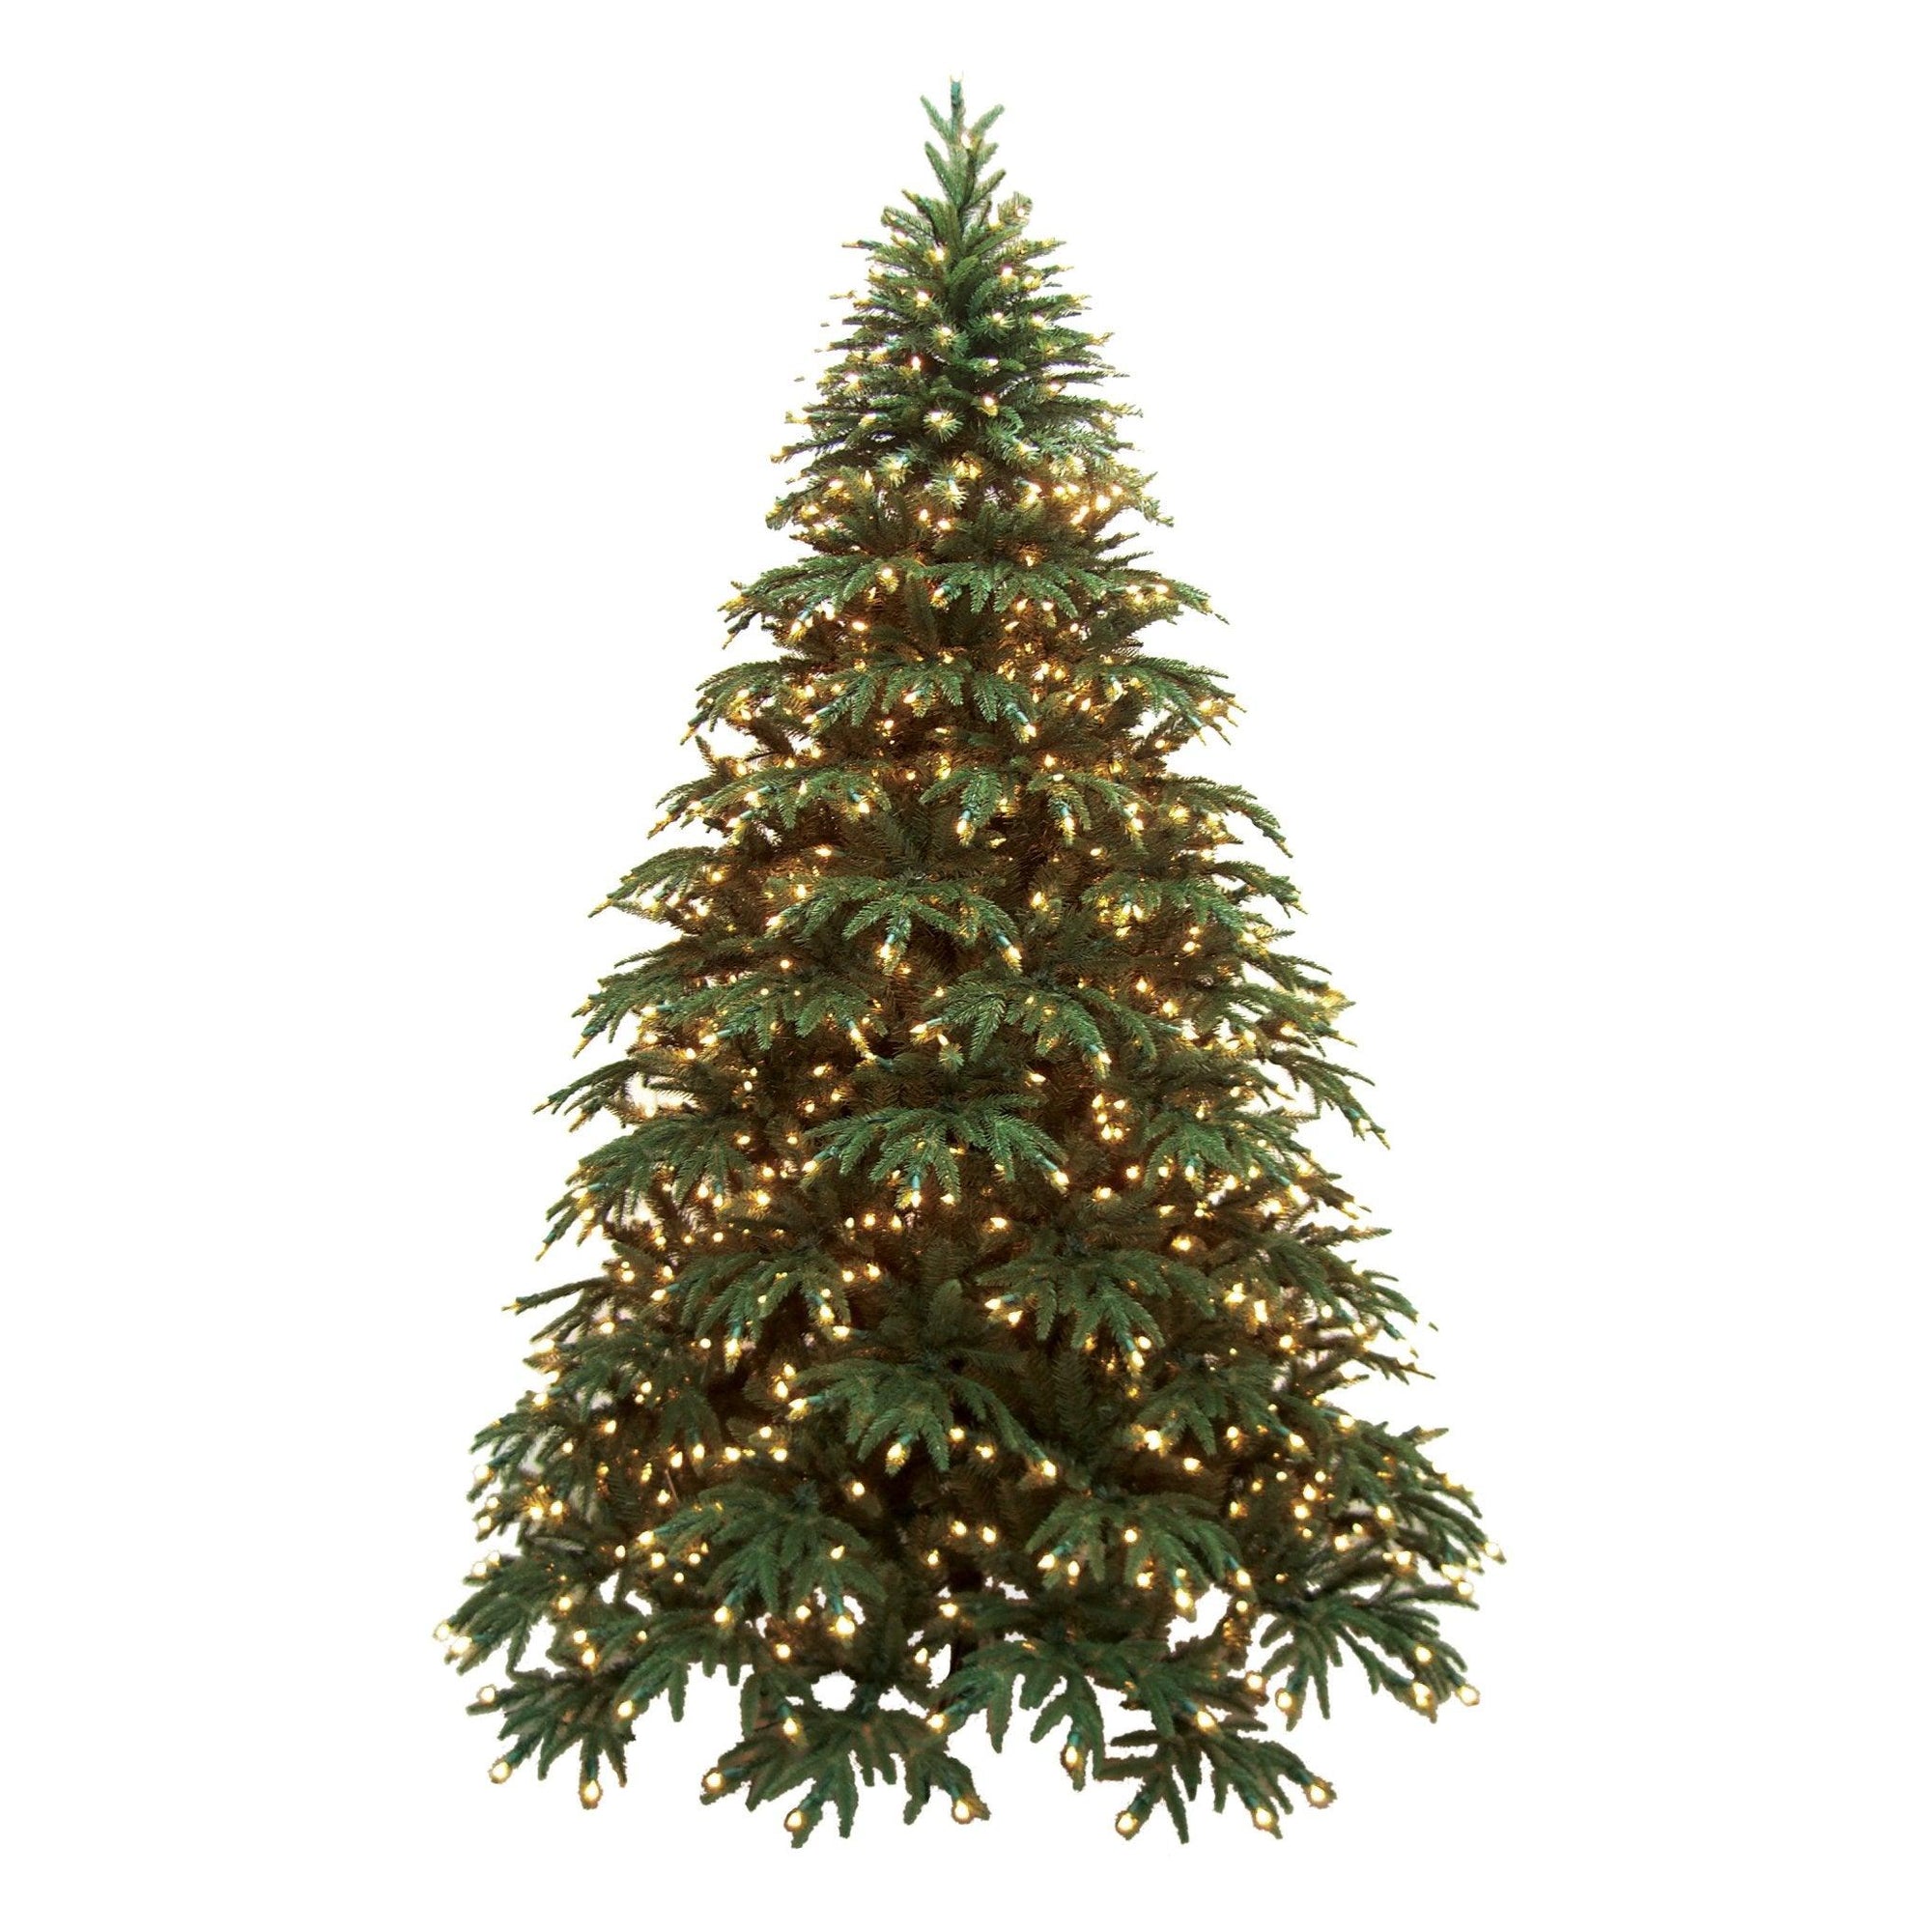 The slim design, measuring 4.5 feet at its base, ensures that you can place this majestic tree in various nooks and corners, bringing holiday cheer to every part of your home. The New Greenland Fir provides the perfect backdrop for your cherished ornaments and decorations, making it the ideal setting for creating cherished holiday memories with your loved ones. 